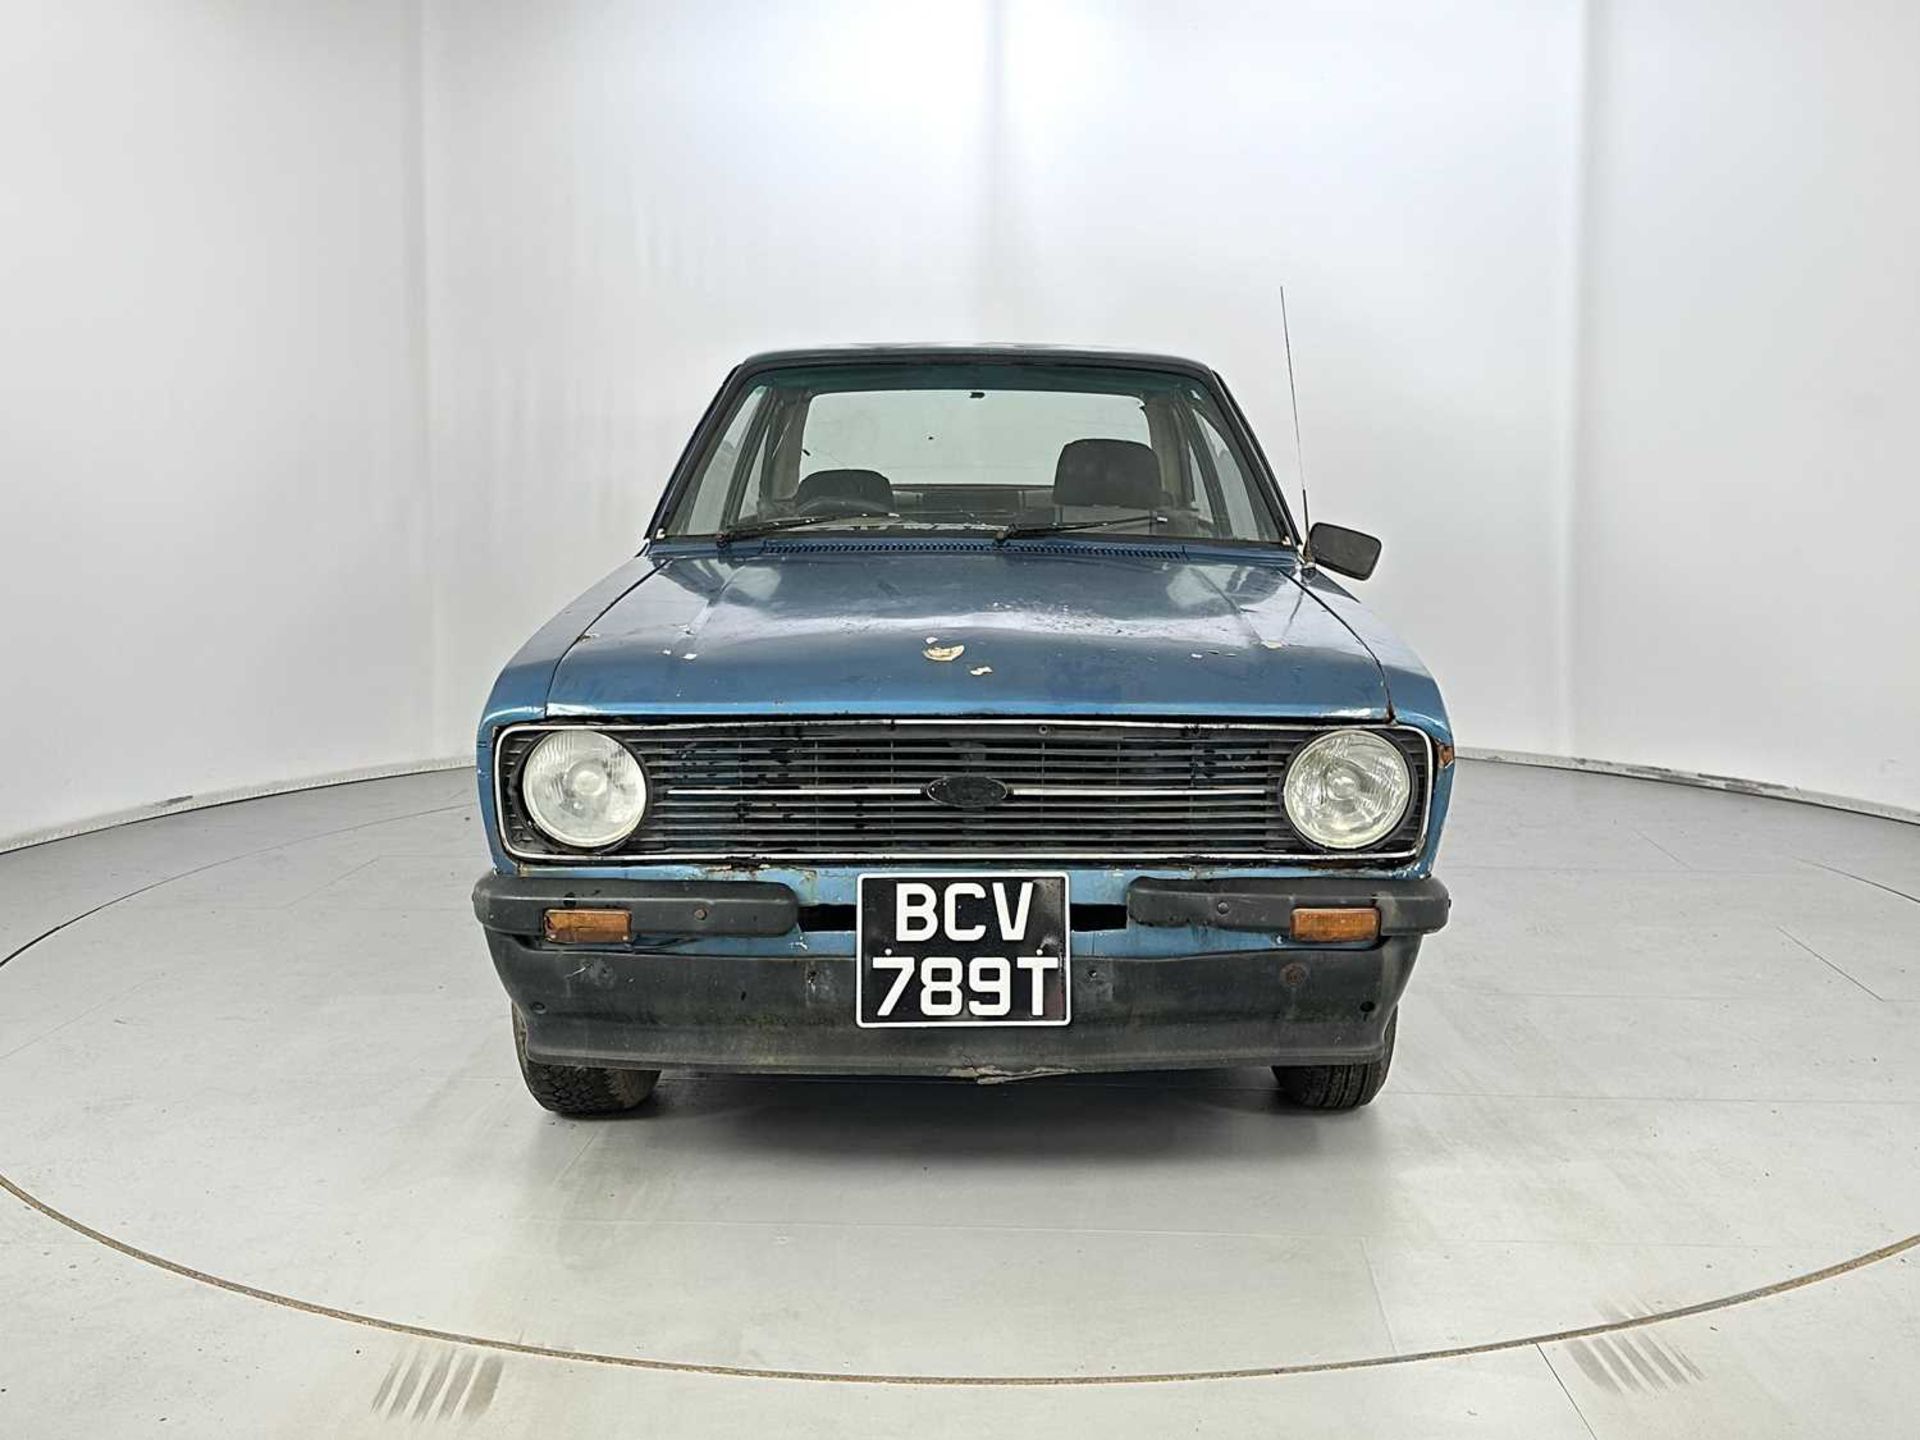 1979 Ford Escort 1600 Sport - Image 2 of 22